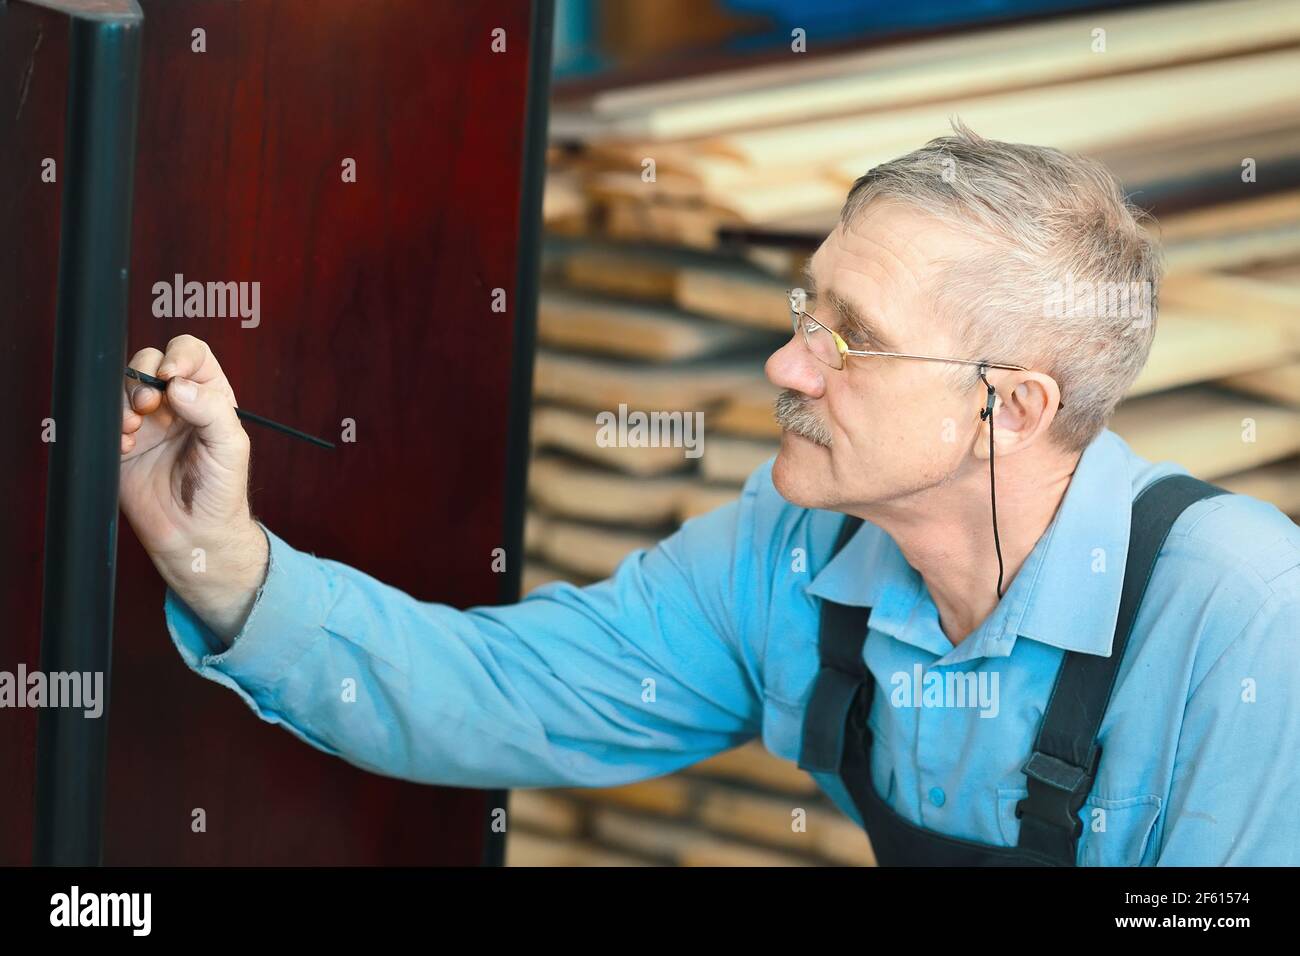 Portrait of an elderly carpenter at work in a carpentry shop. Stock Photo